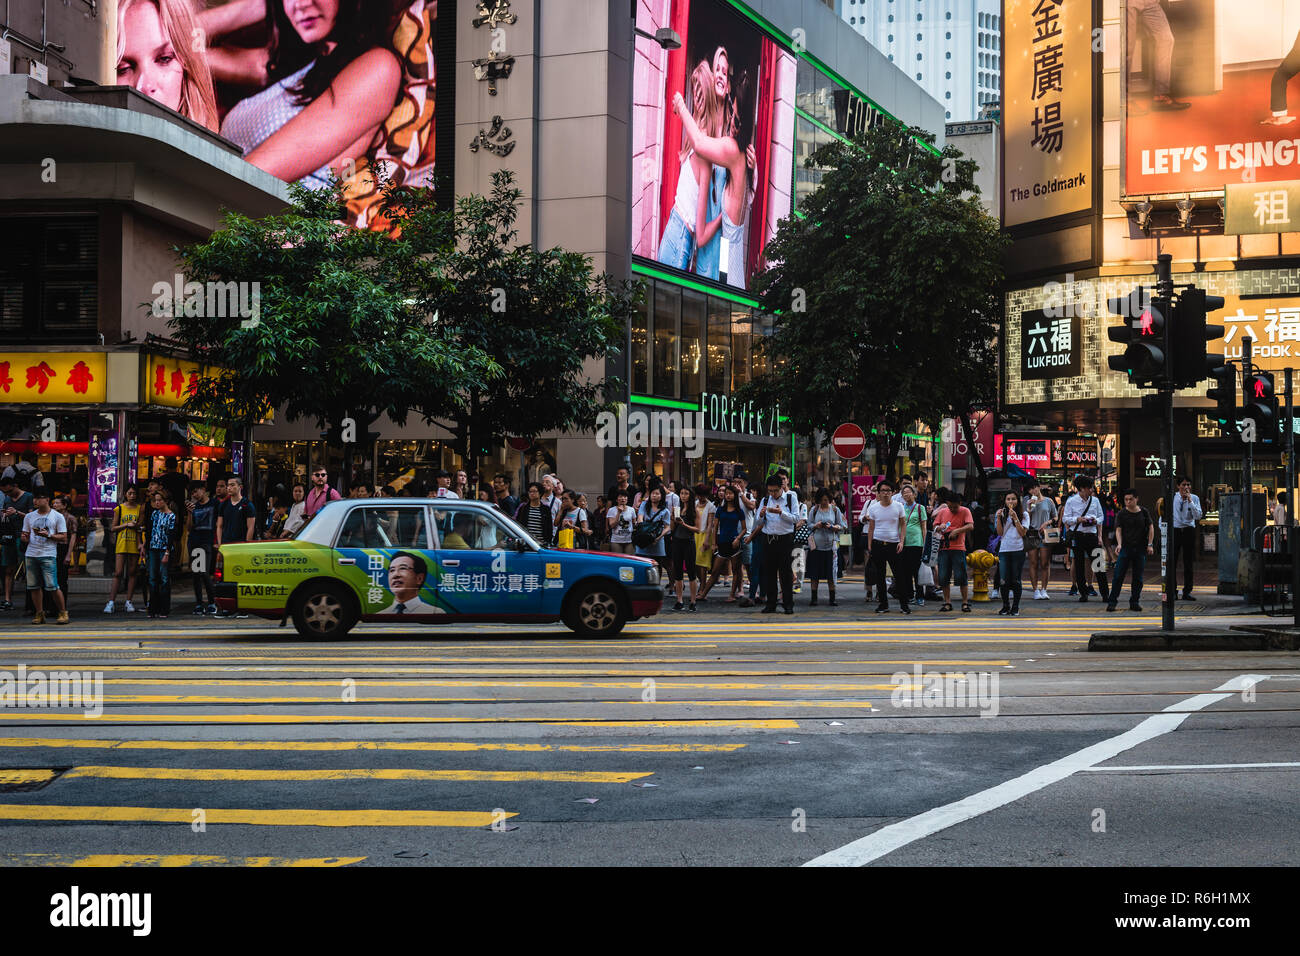 People waiting for a green light so the can cross a street in Hong Kong. Stock Photo